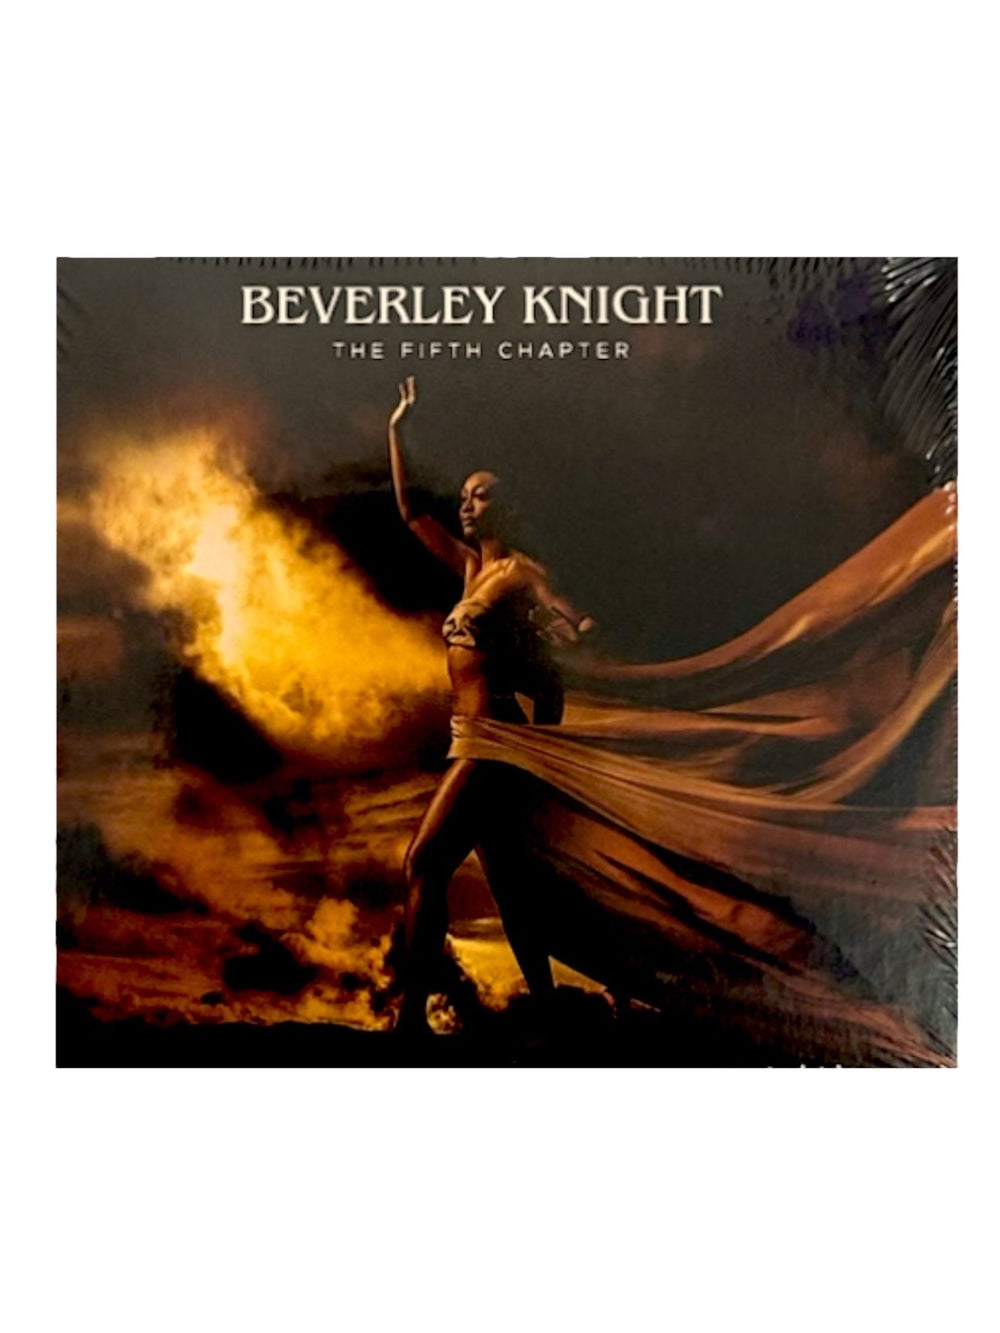 Prince – The Fifth Chapter Beverley Knight CD Album Brand New Prince